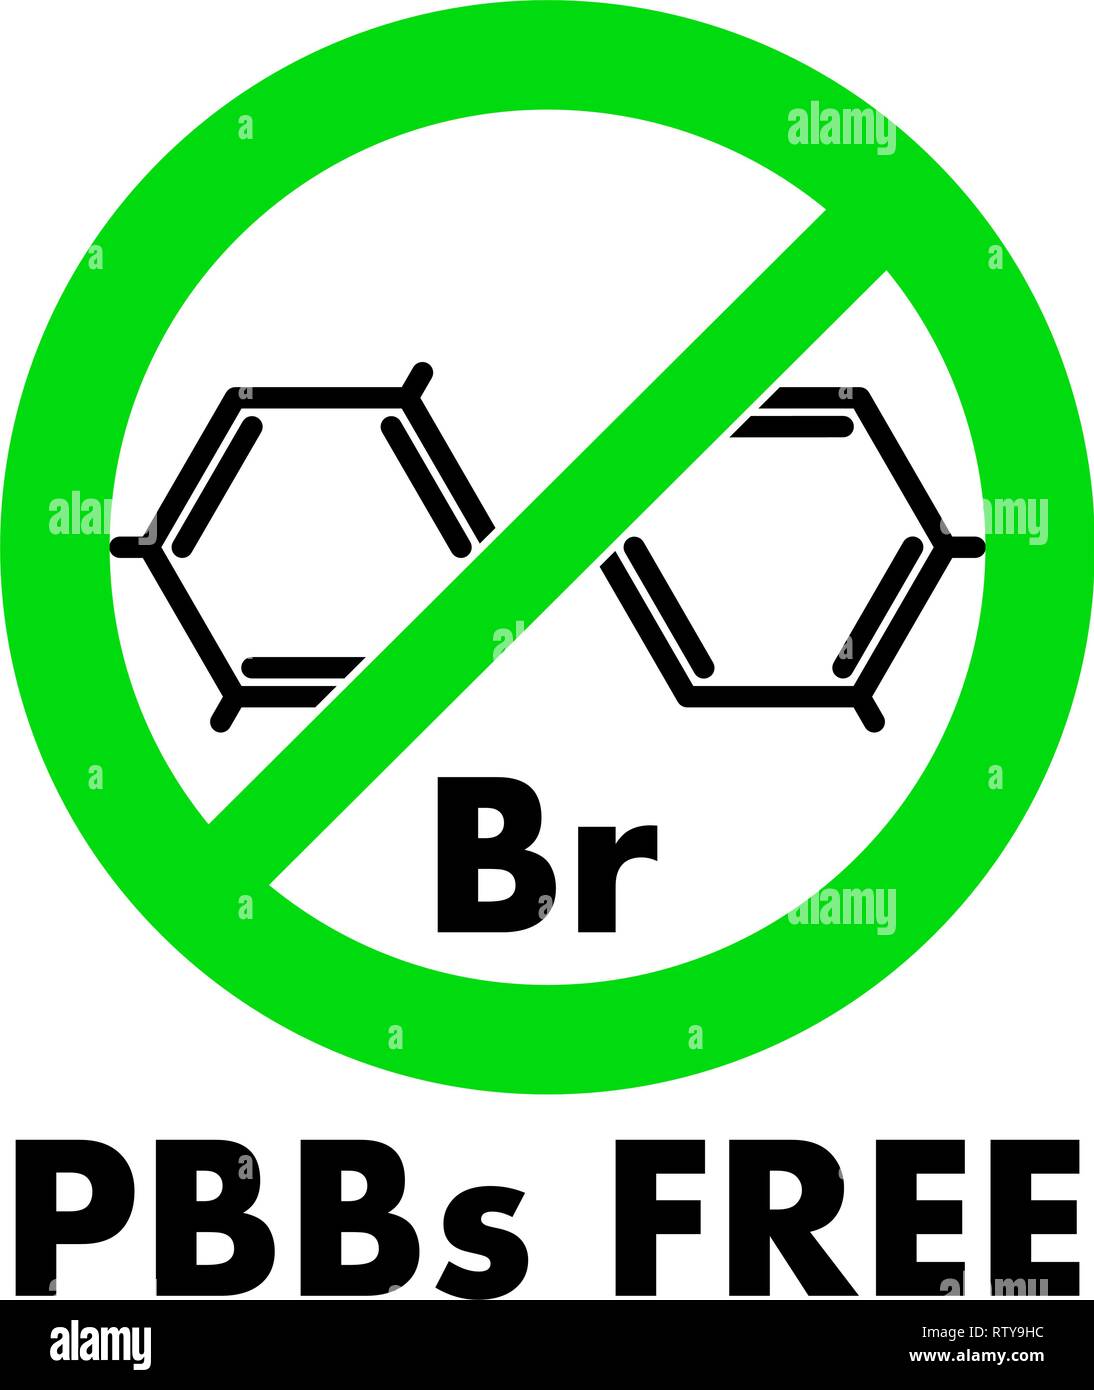 PBBs free icon. Polybrominated biphenyls chemical molecule and letters Br (chemical symbol for Bromine) in green crossed circle, with text under. Stock Vector